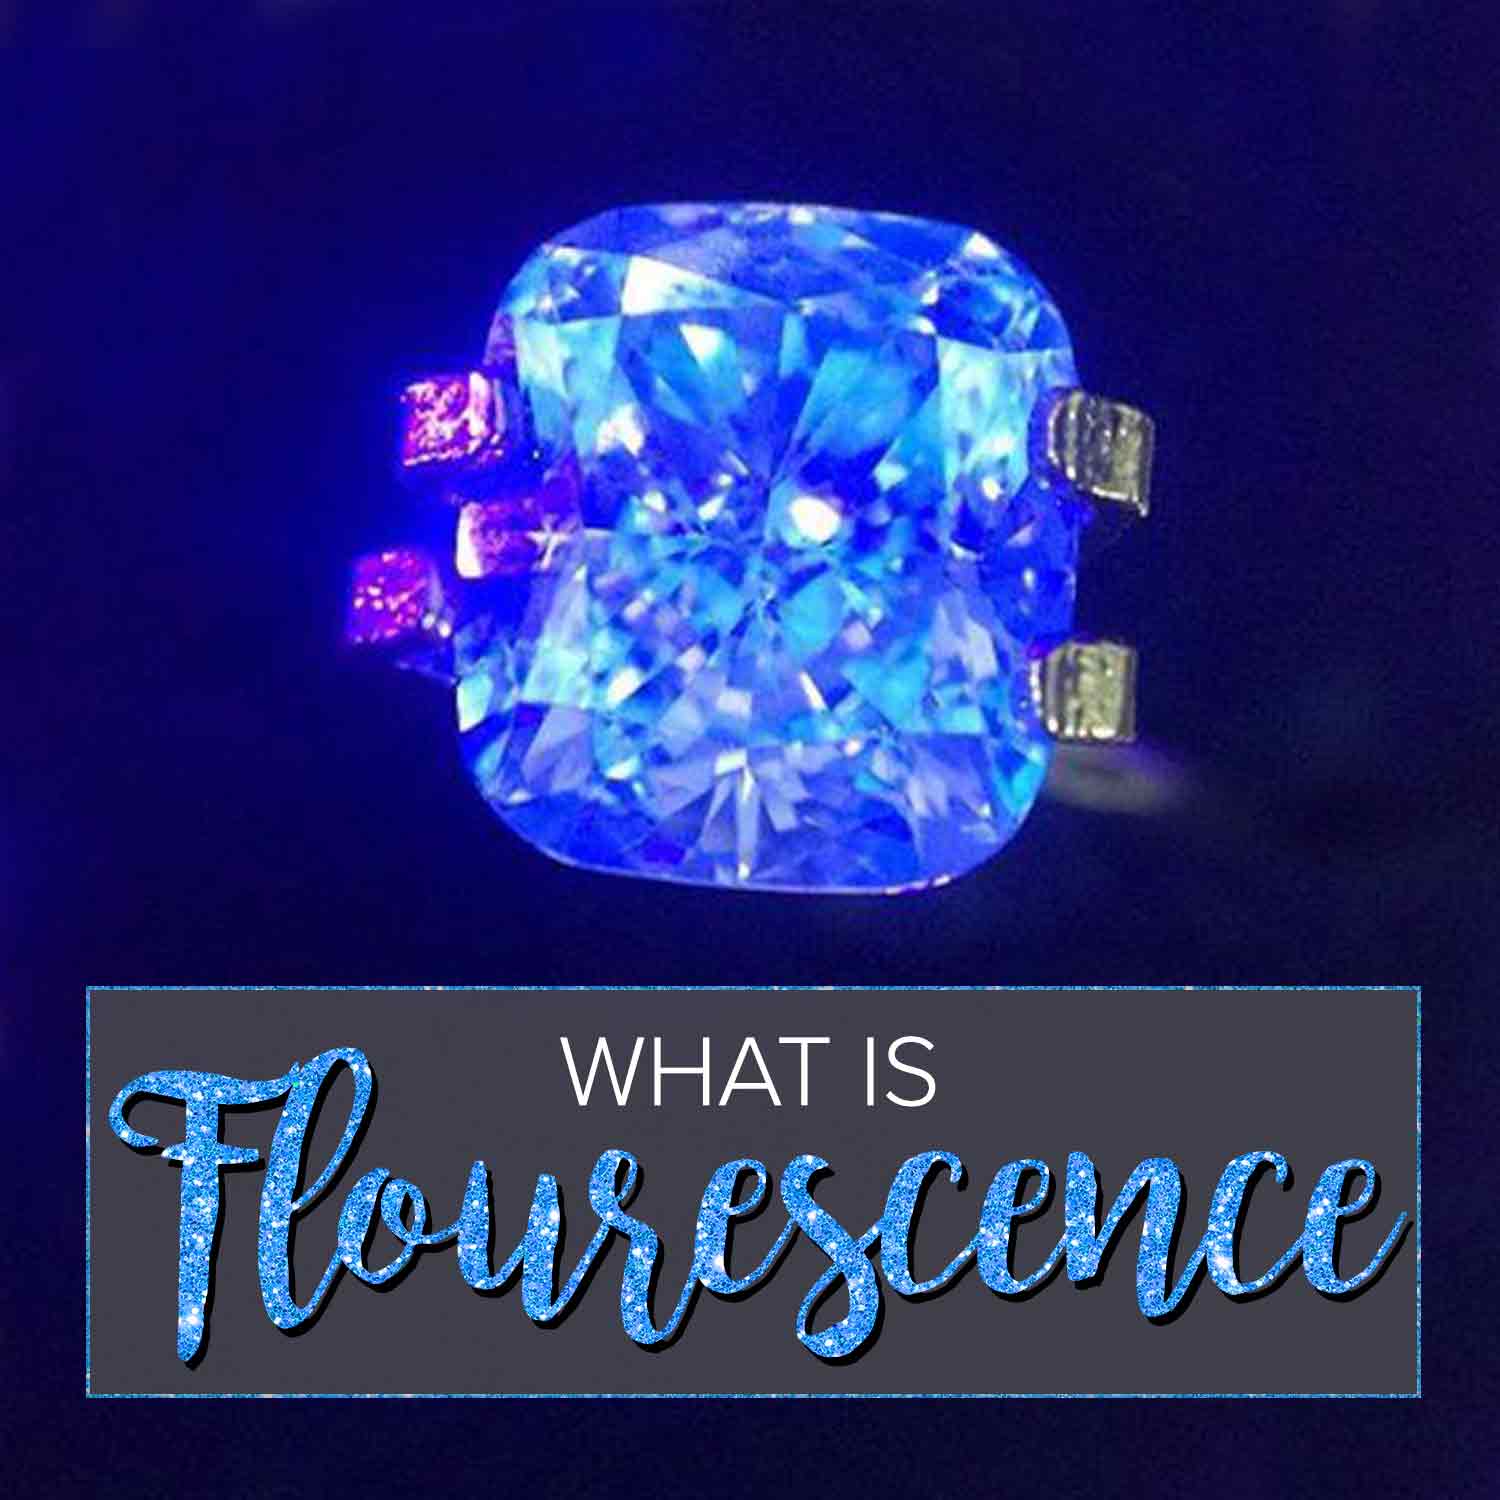 A glowing diamond with the text "What is fluorescence" under it.